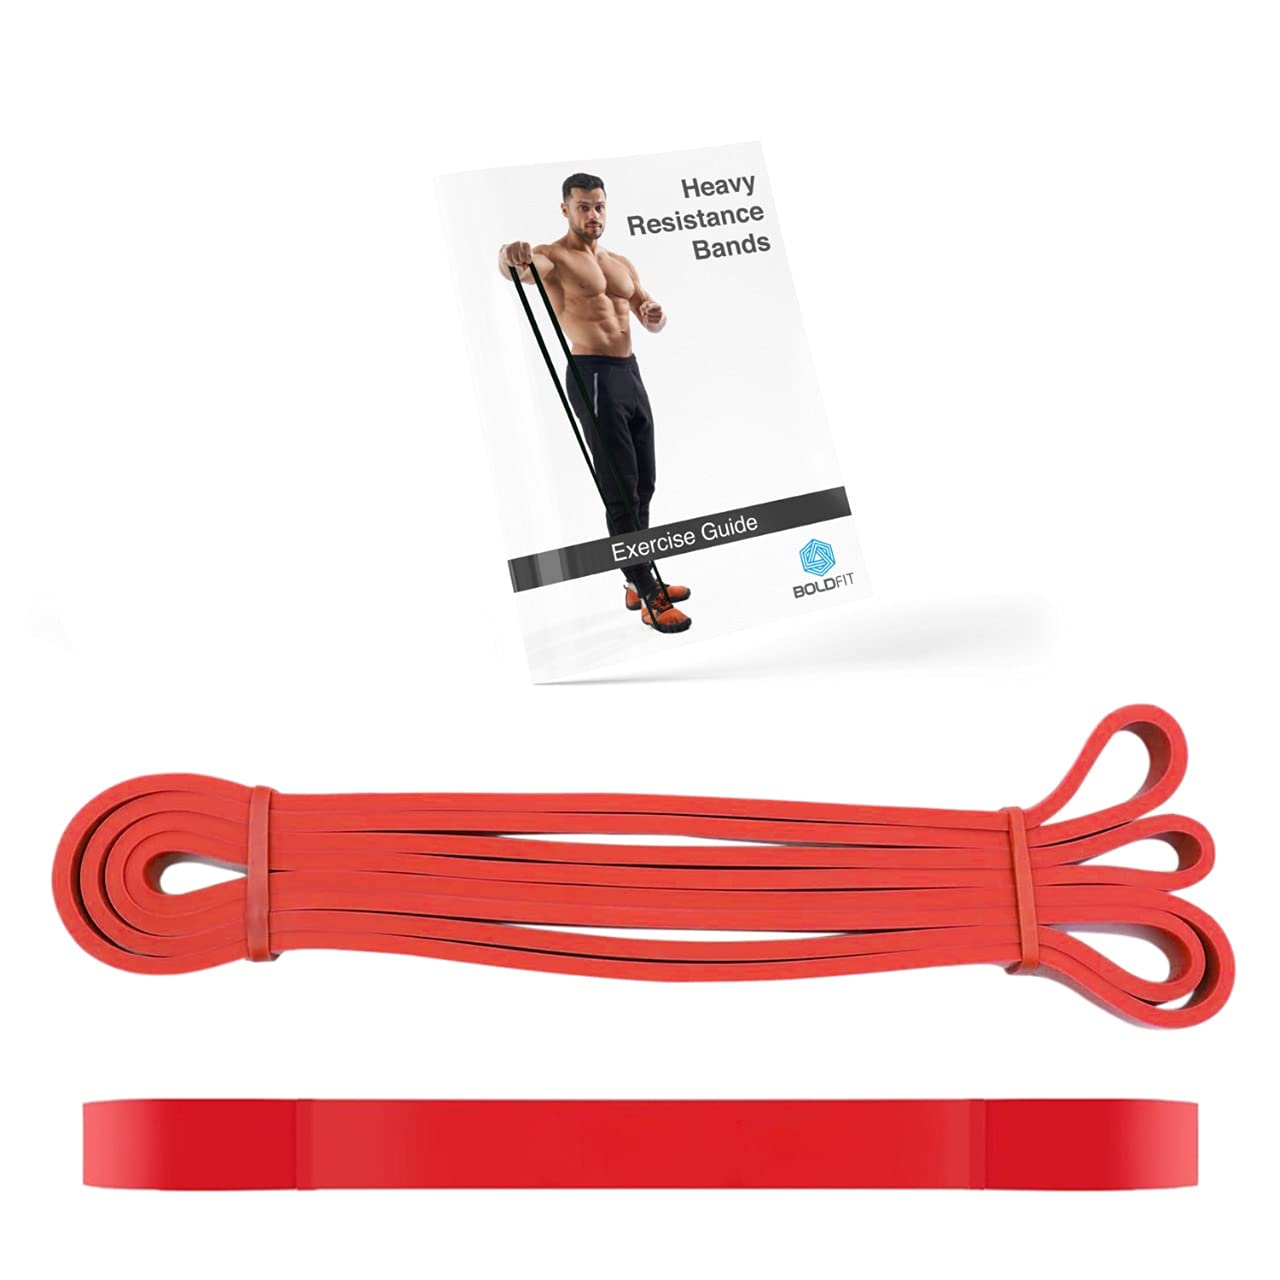 best resistance brands India - Boldfit Heavy Resistance Band for Exercise & Stretching